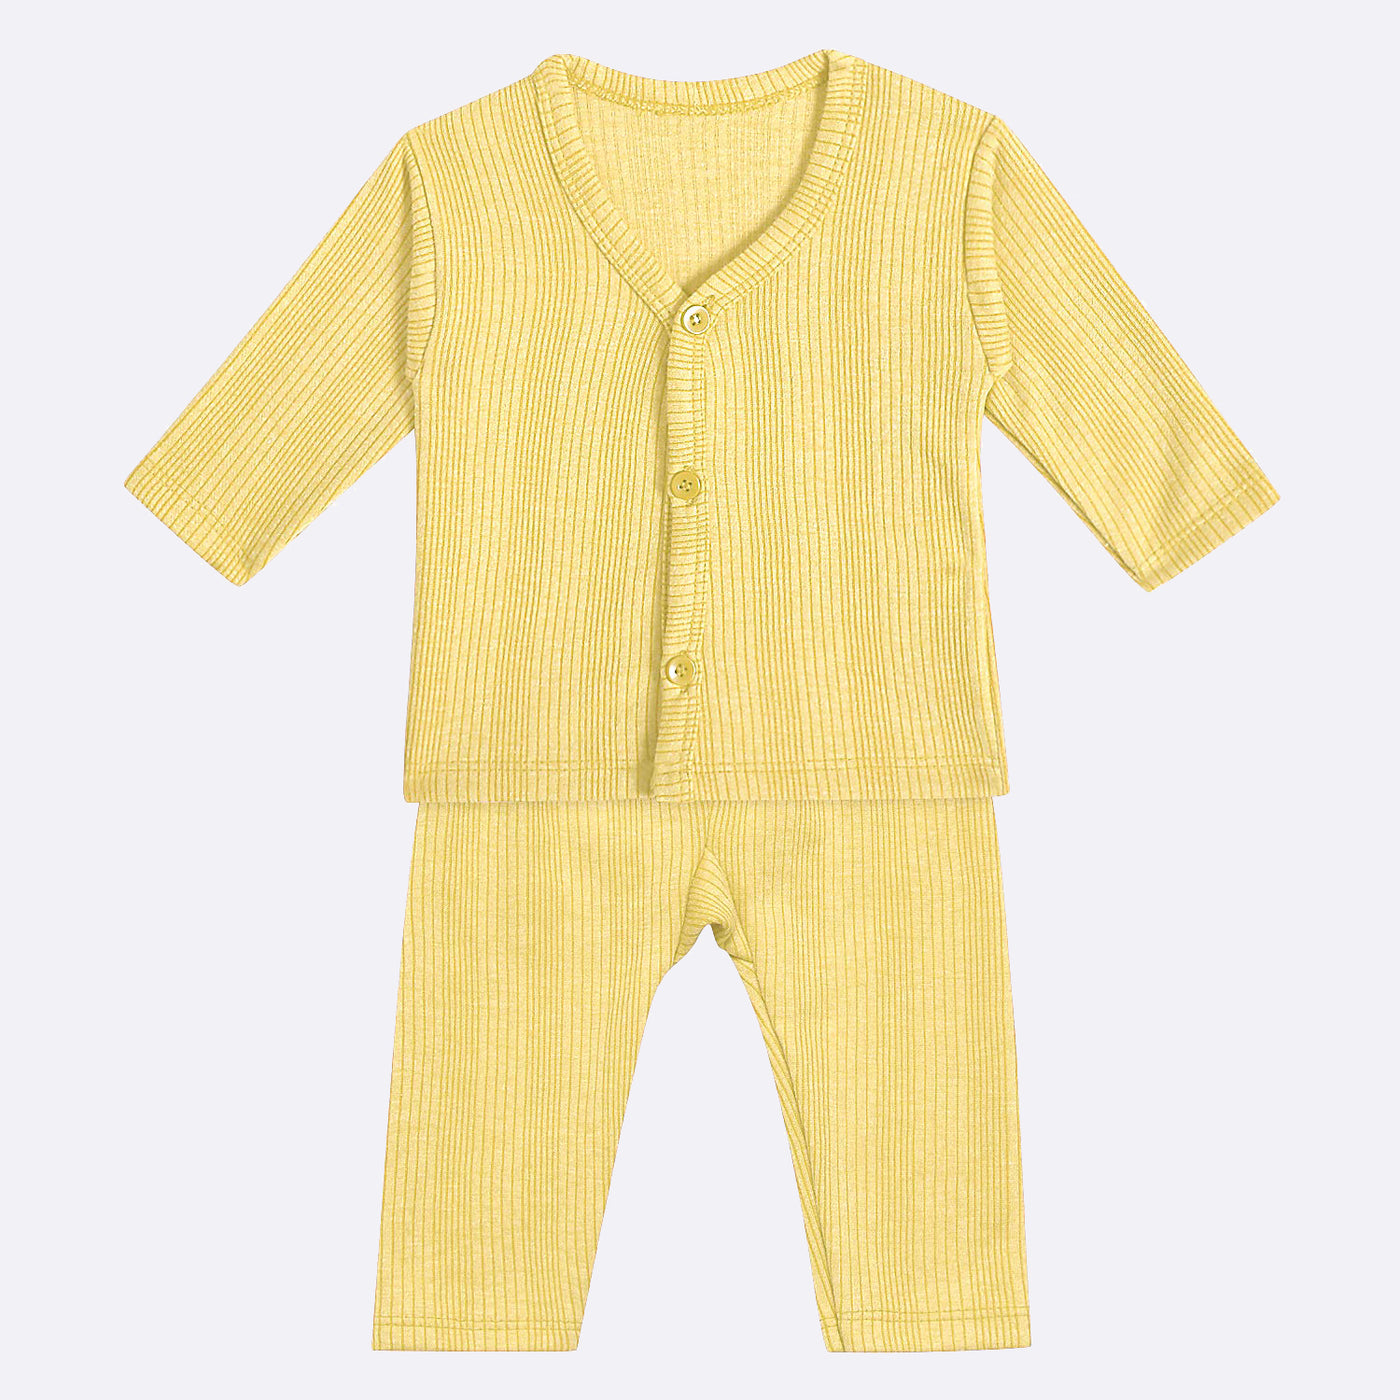 Super Comfy and Cozy Thermal Combo Set (Yellow, Pack of 1)